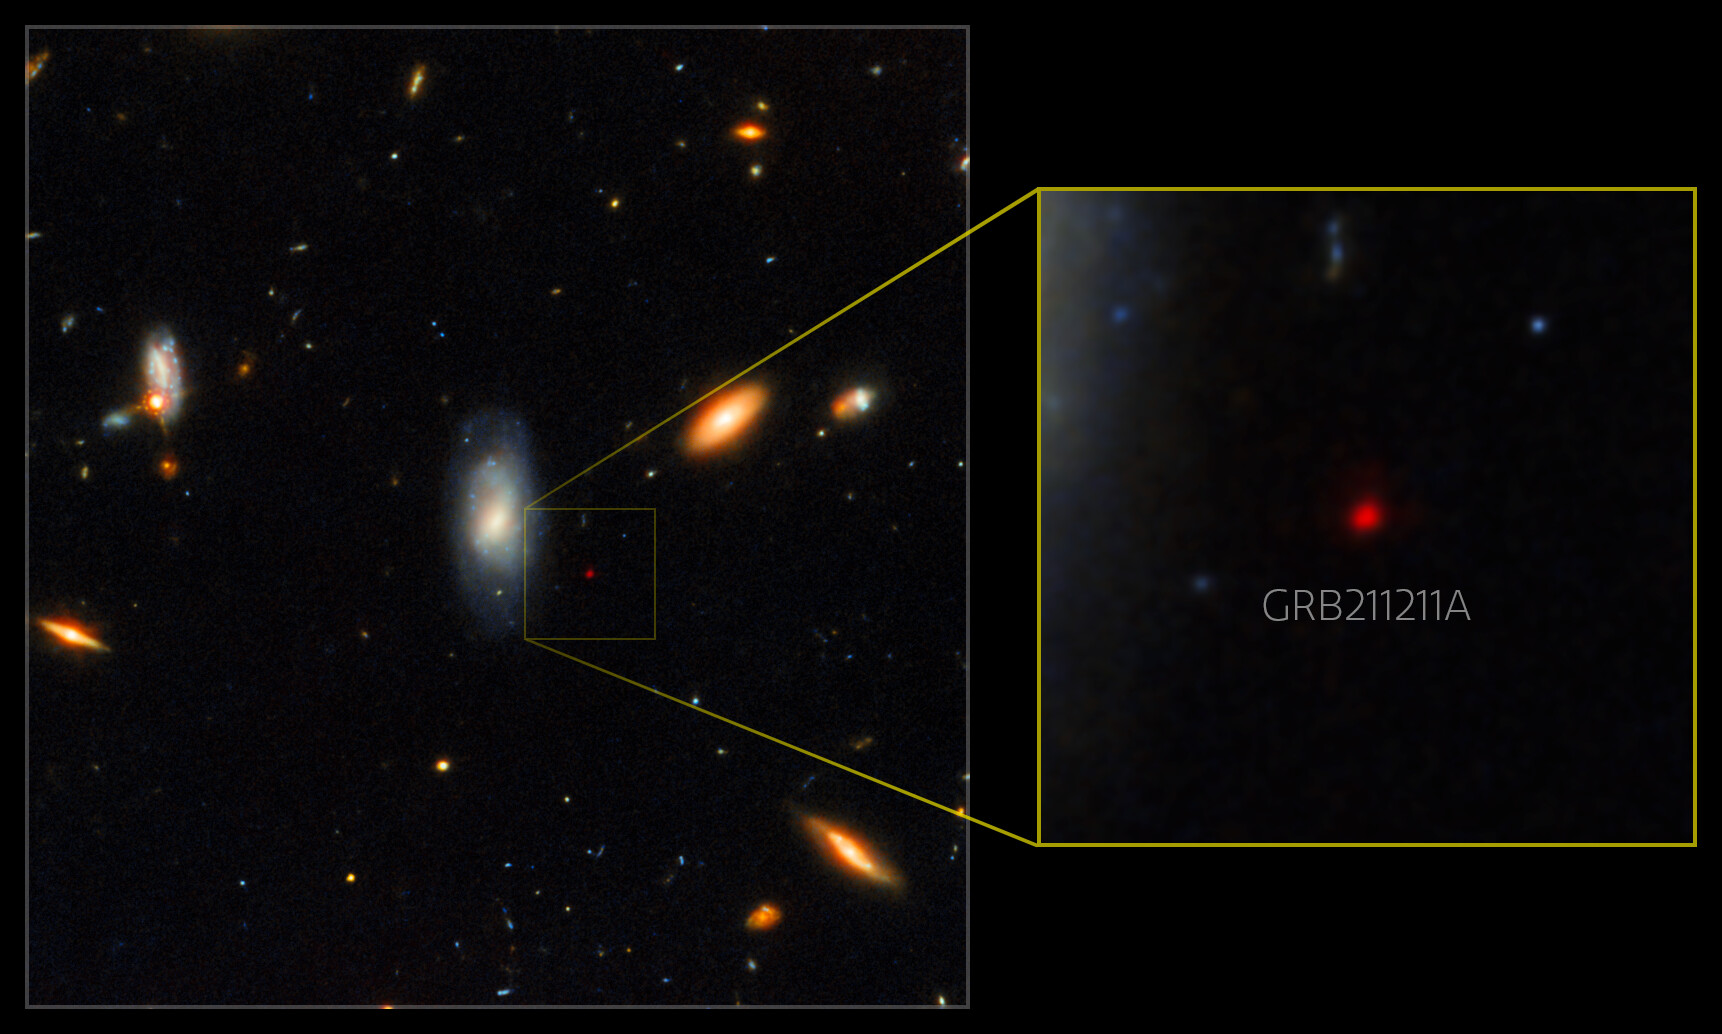 This Gemini North image, superimposed on an image taken with the Hubble Space Telescope, shows the telltale near-infrared afterglow of a kilonova produced by a long GRB (GRB 211211A). This discovery challenges the prevailing theory that long GRBs exclusively come from supernovae, the end-of-life explosions of massive stars.